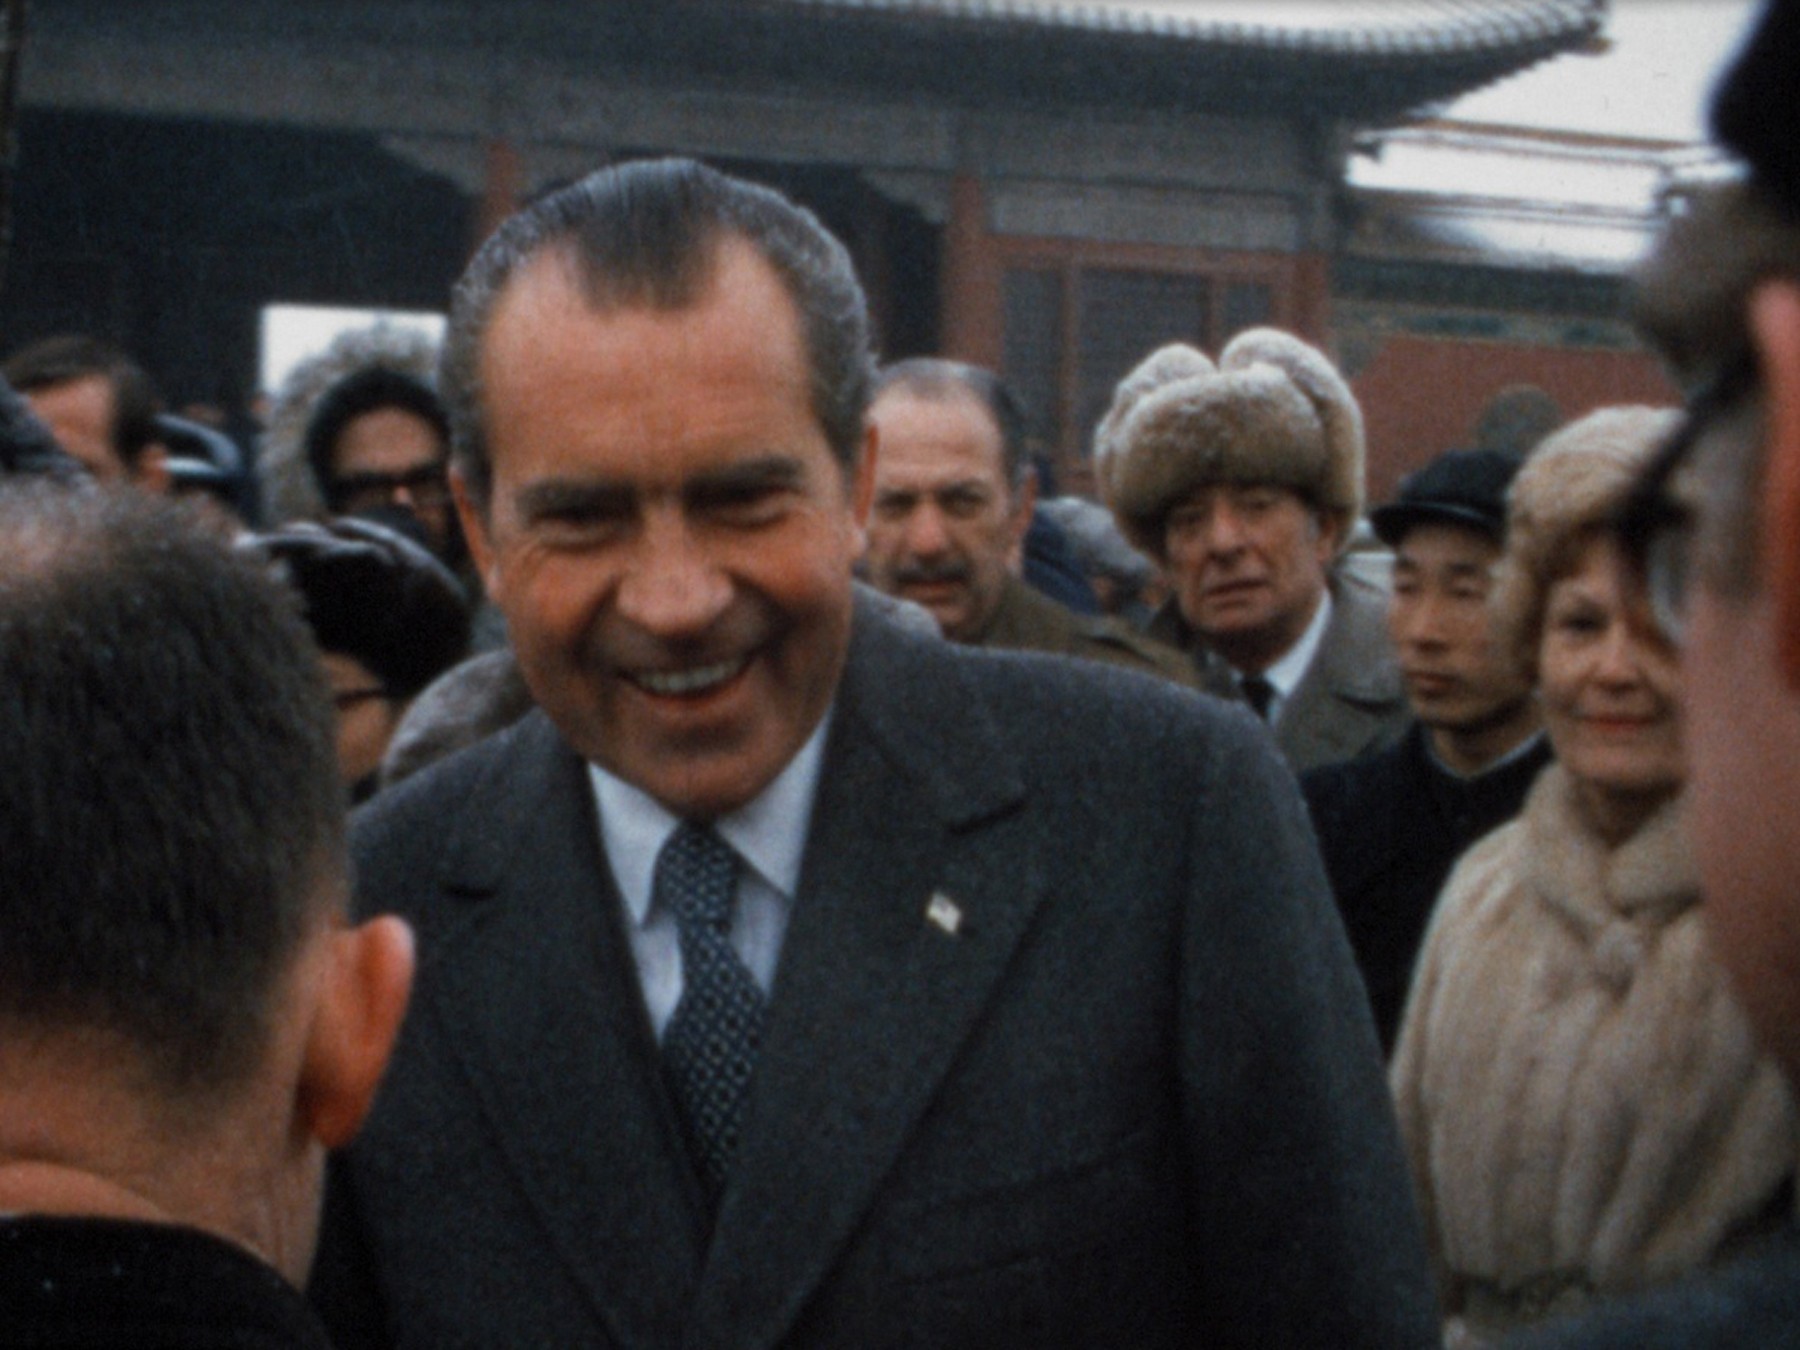 President and Mrs. Nixon mingle with the locals in China while the American press looks on (February 1972)